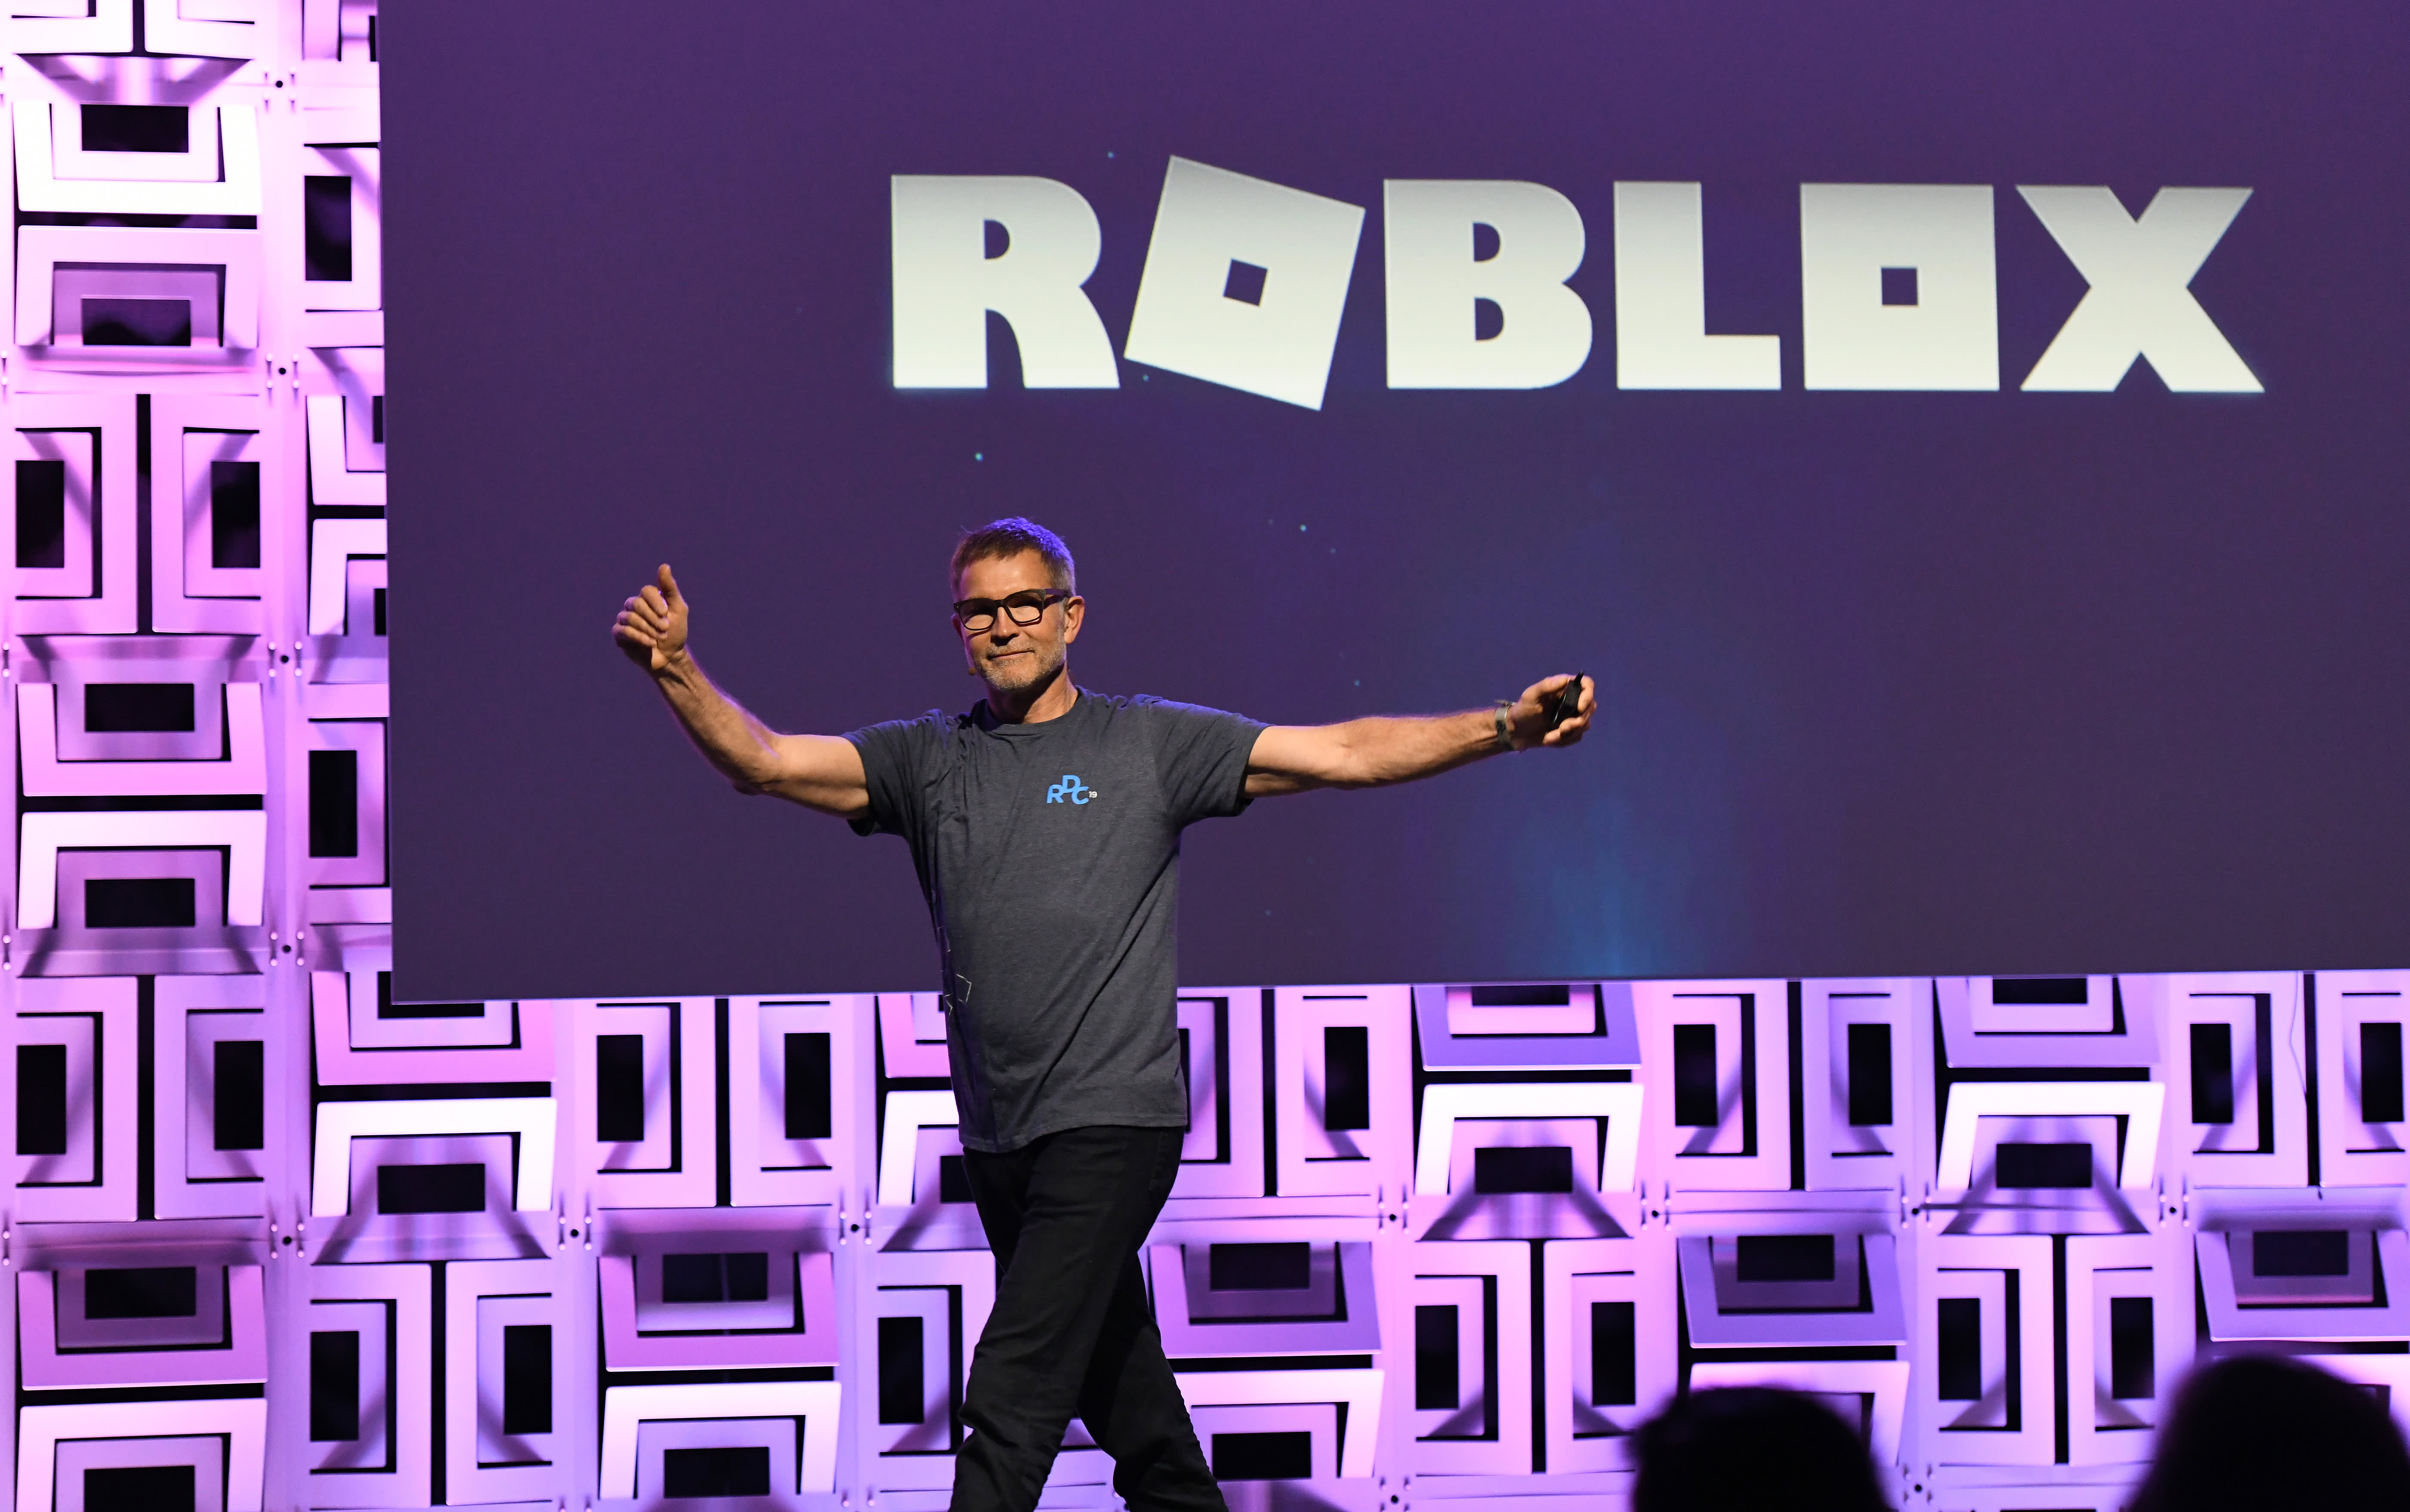 Roblox tells employees they have to come to office three days a week